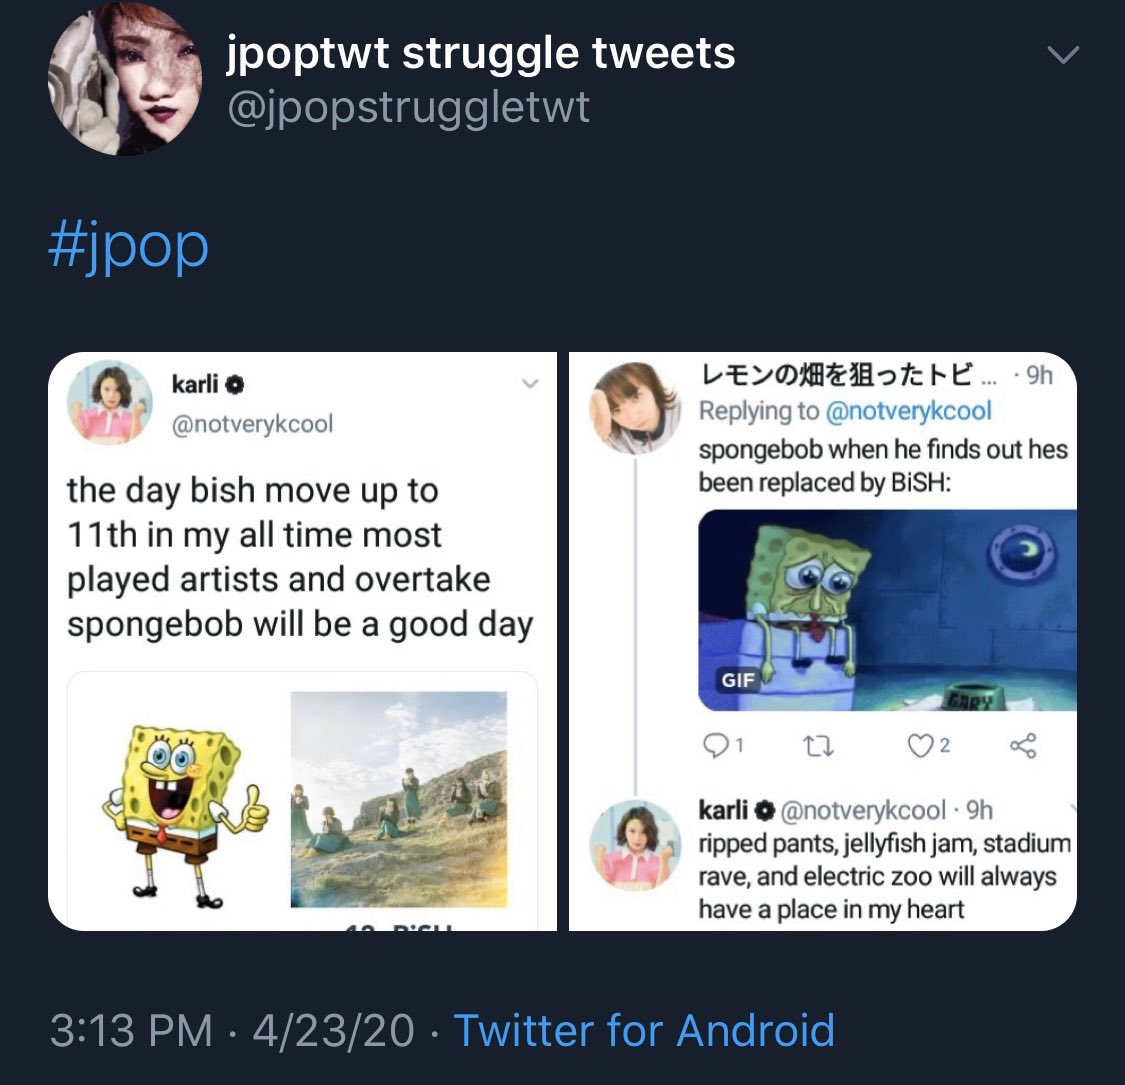 day 38: I got on jpop struggle tweets cause of a bish related tweet 